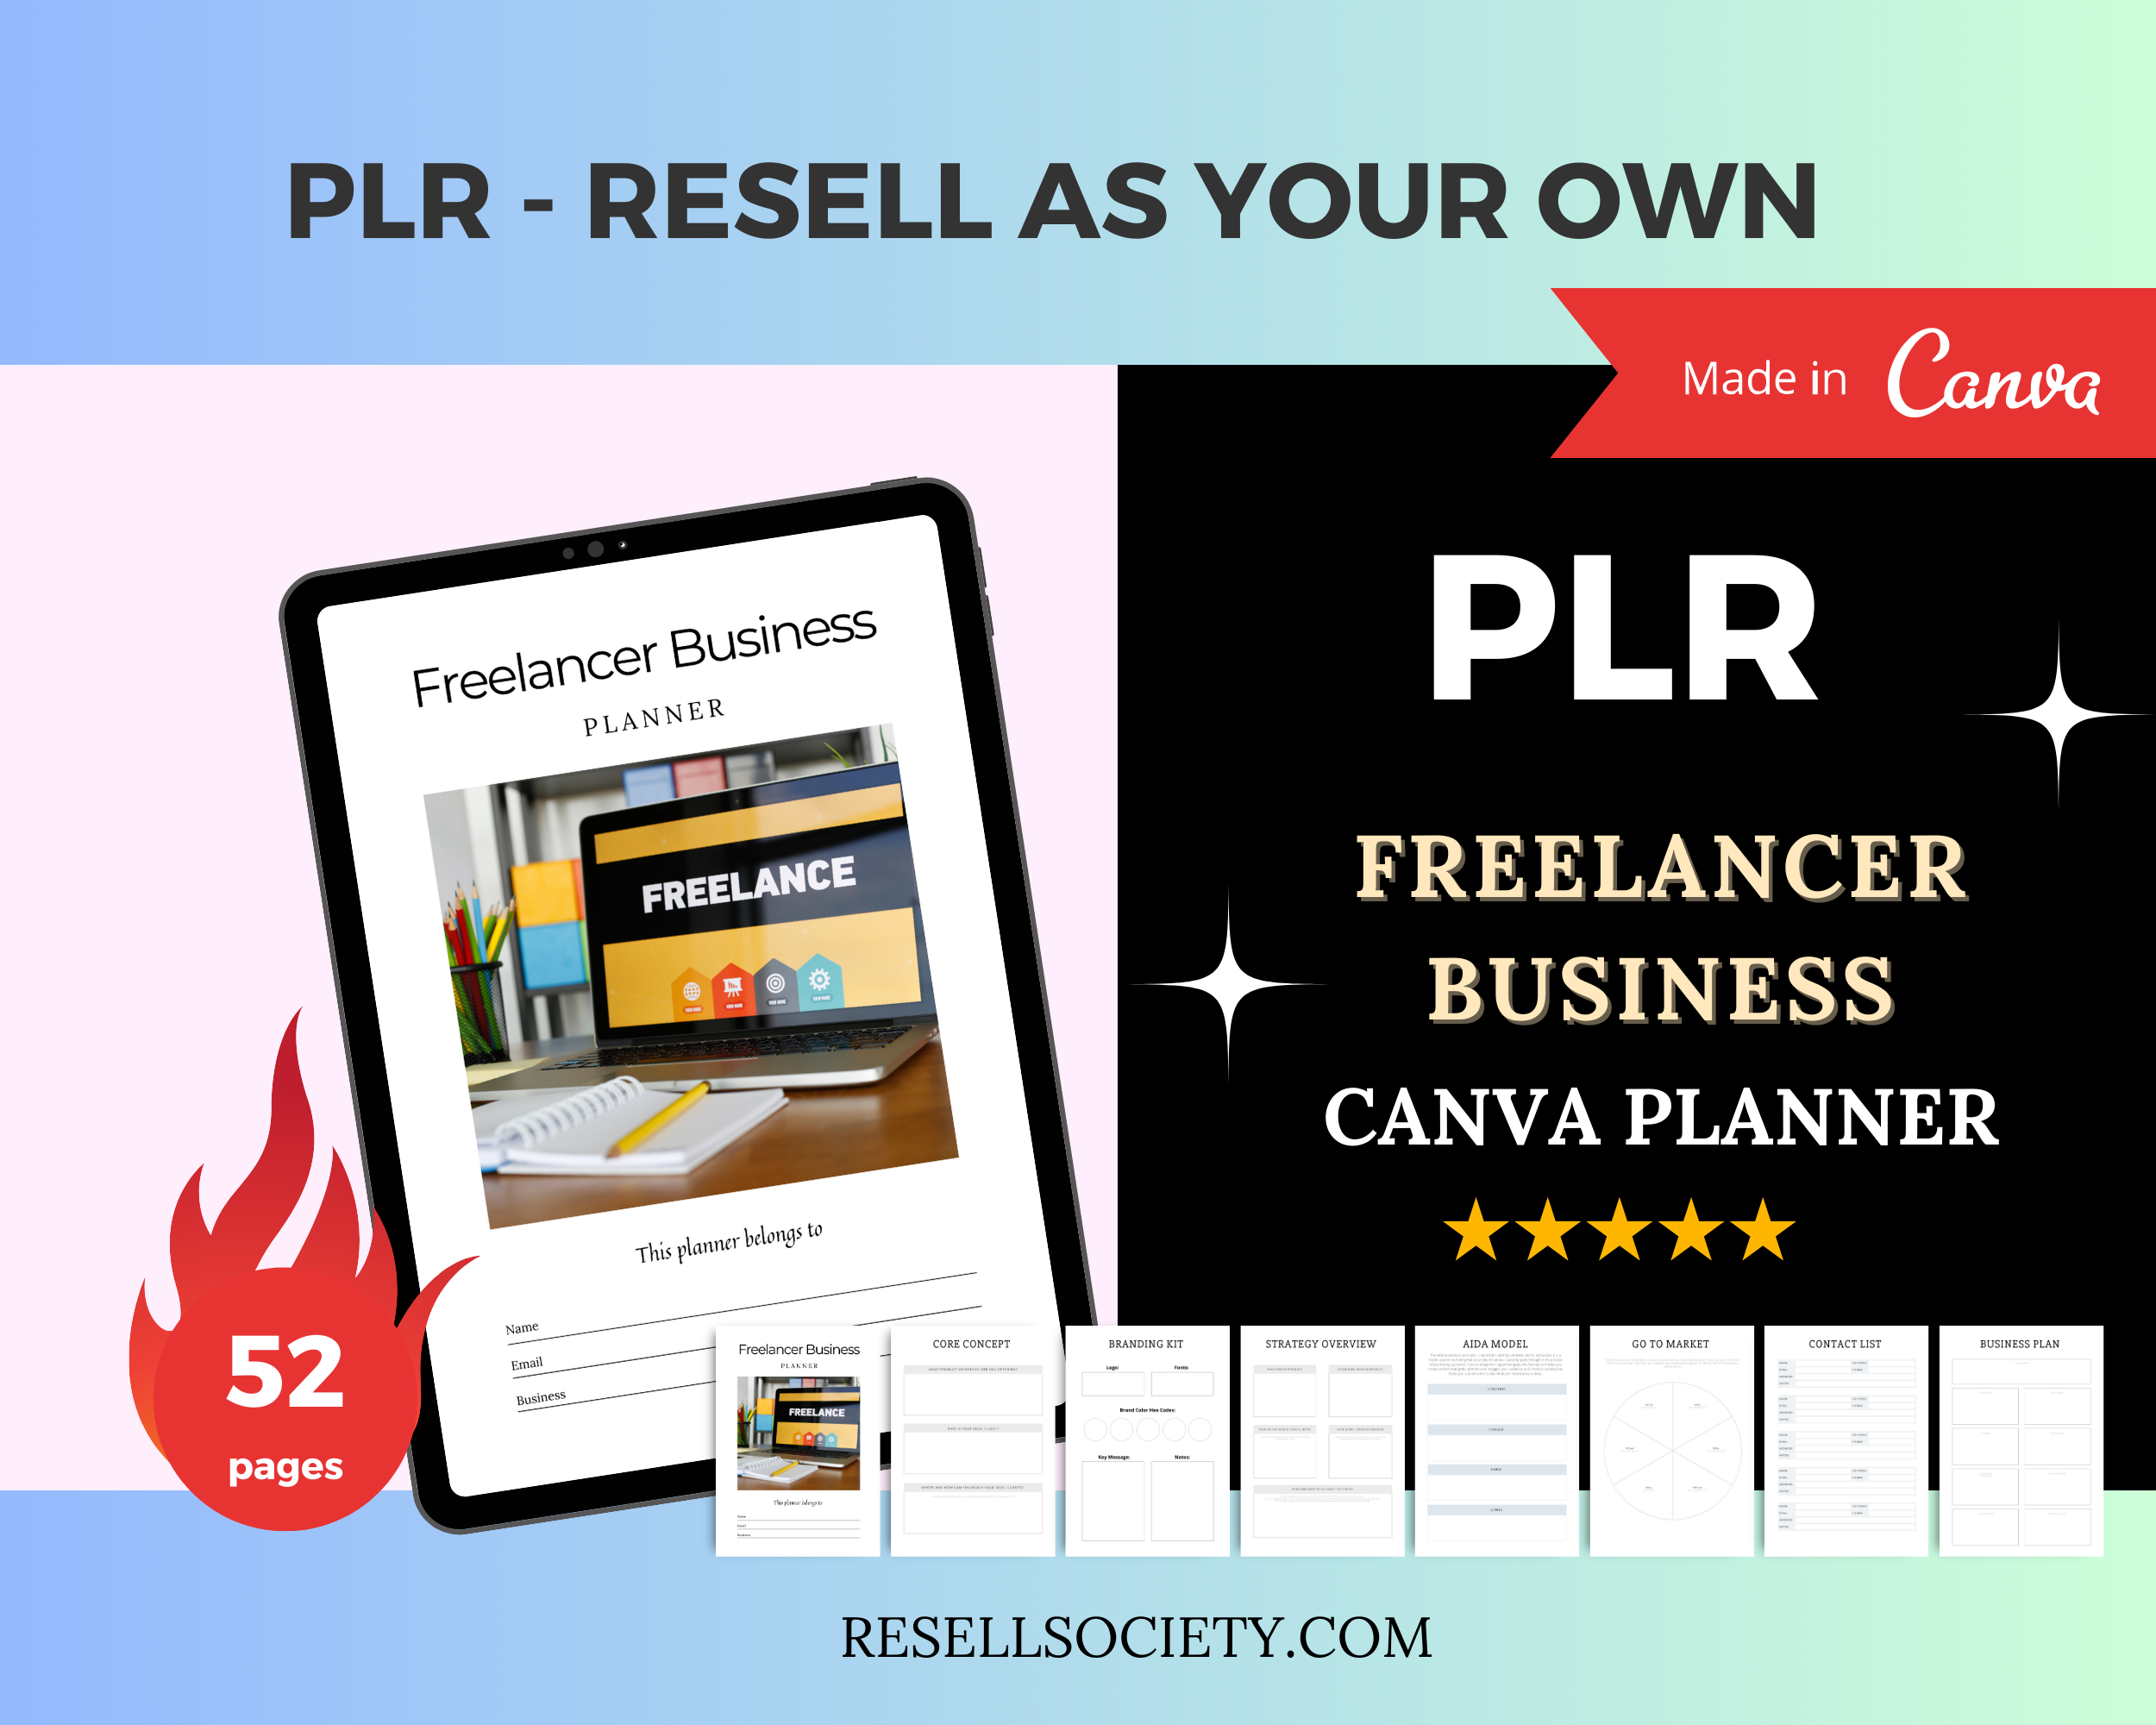 Editable Freelancer Planner in Canva | Commercial Use